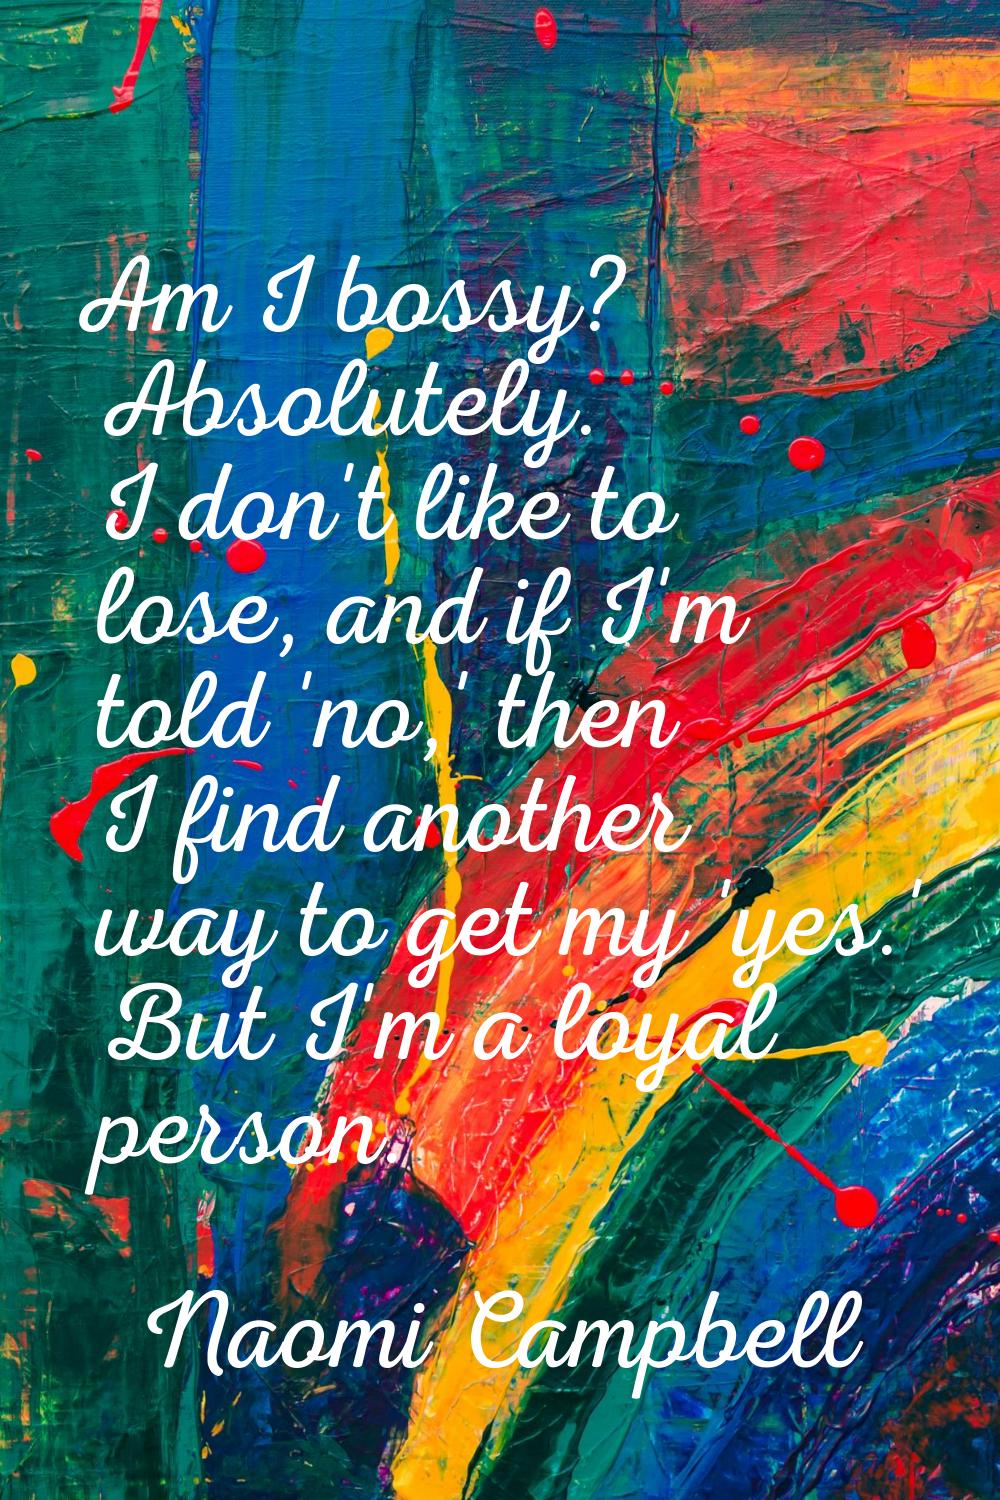 Am I bossy? Absolutely. I don't like to lose, and if I'm told 'no,' then I find another way to get 